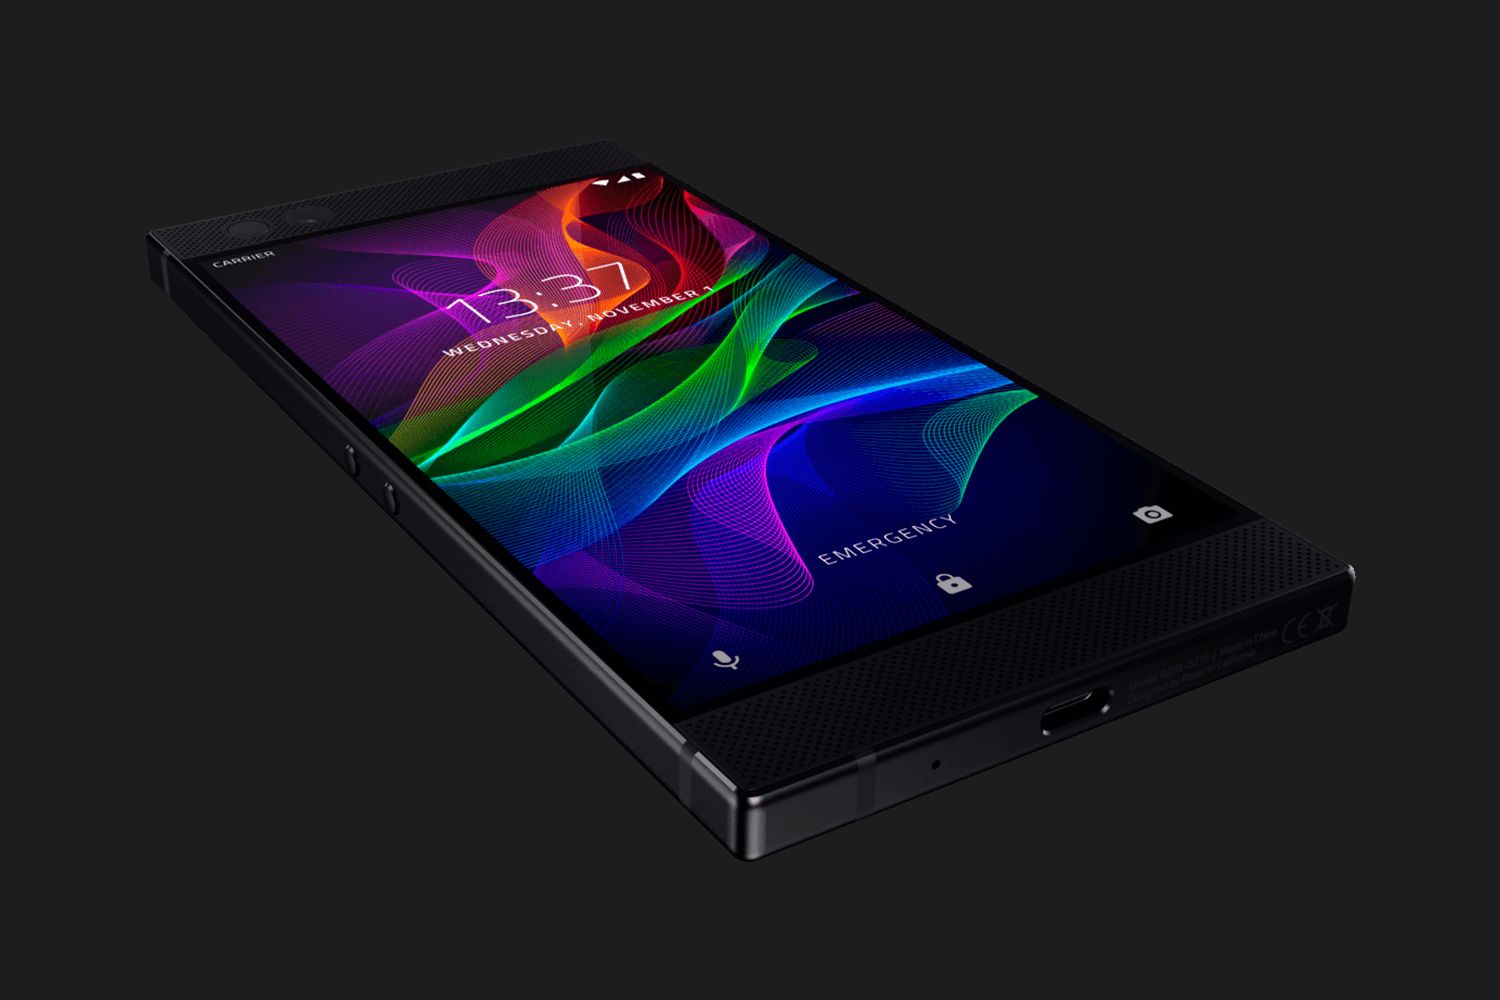 Razer wants to revolutionize mobile gaming with its new smartphone